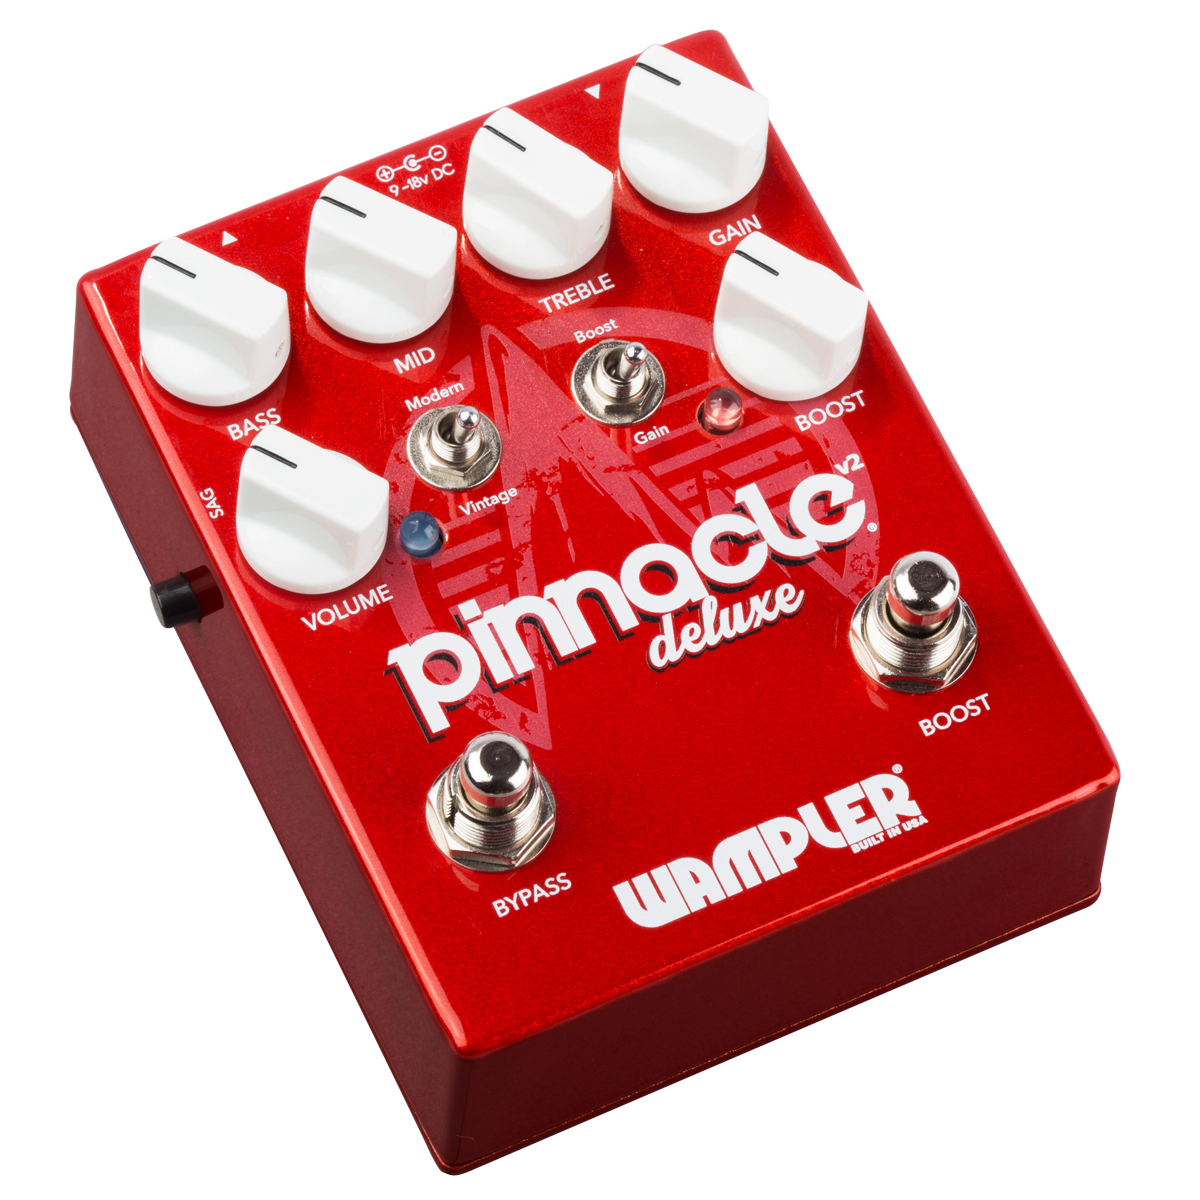 Wampler Pedals Pinnacle Deluxe v2e【オーバードライブ 